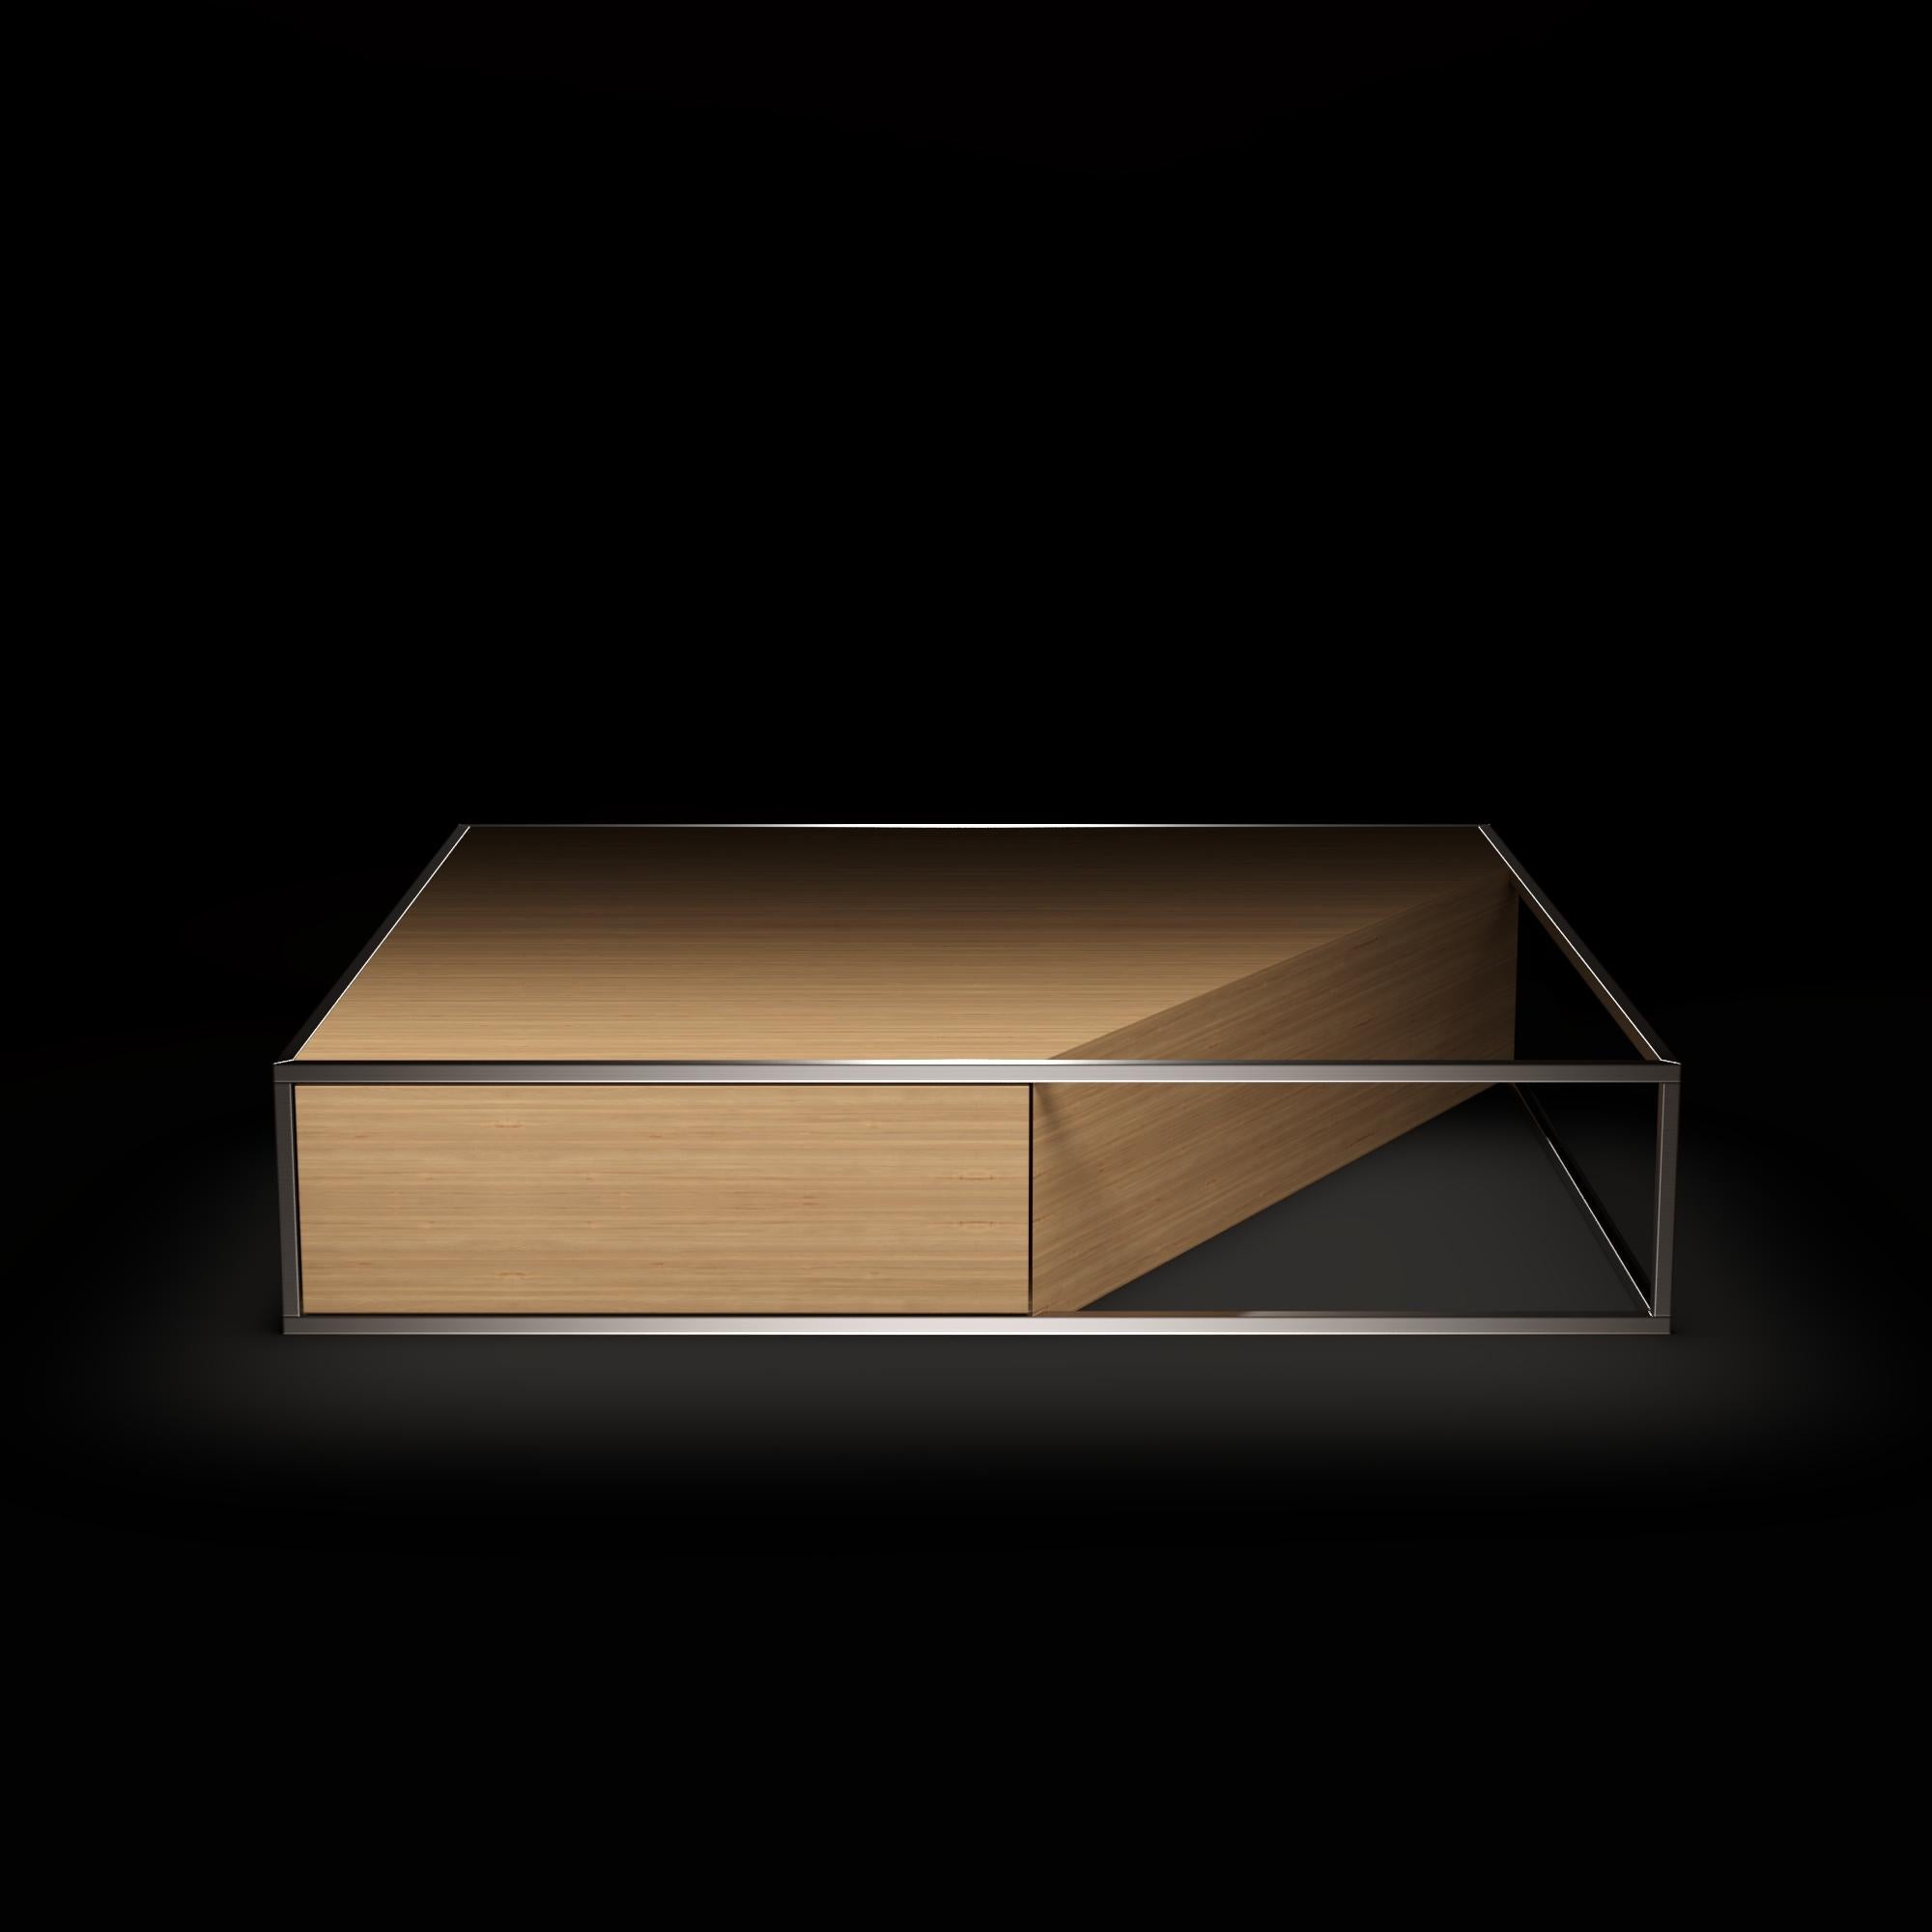 Modern Minimalist Square Center Coffee Table Oak Wood Brushed Stainless Steel In New Condition For Sale In Vila Nova Famalicão, PT